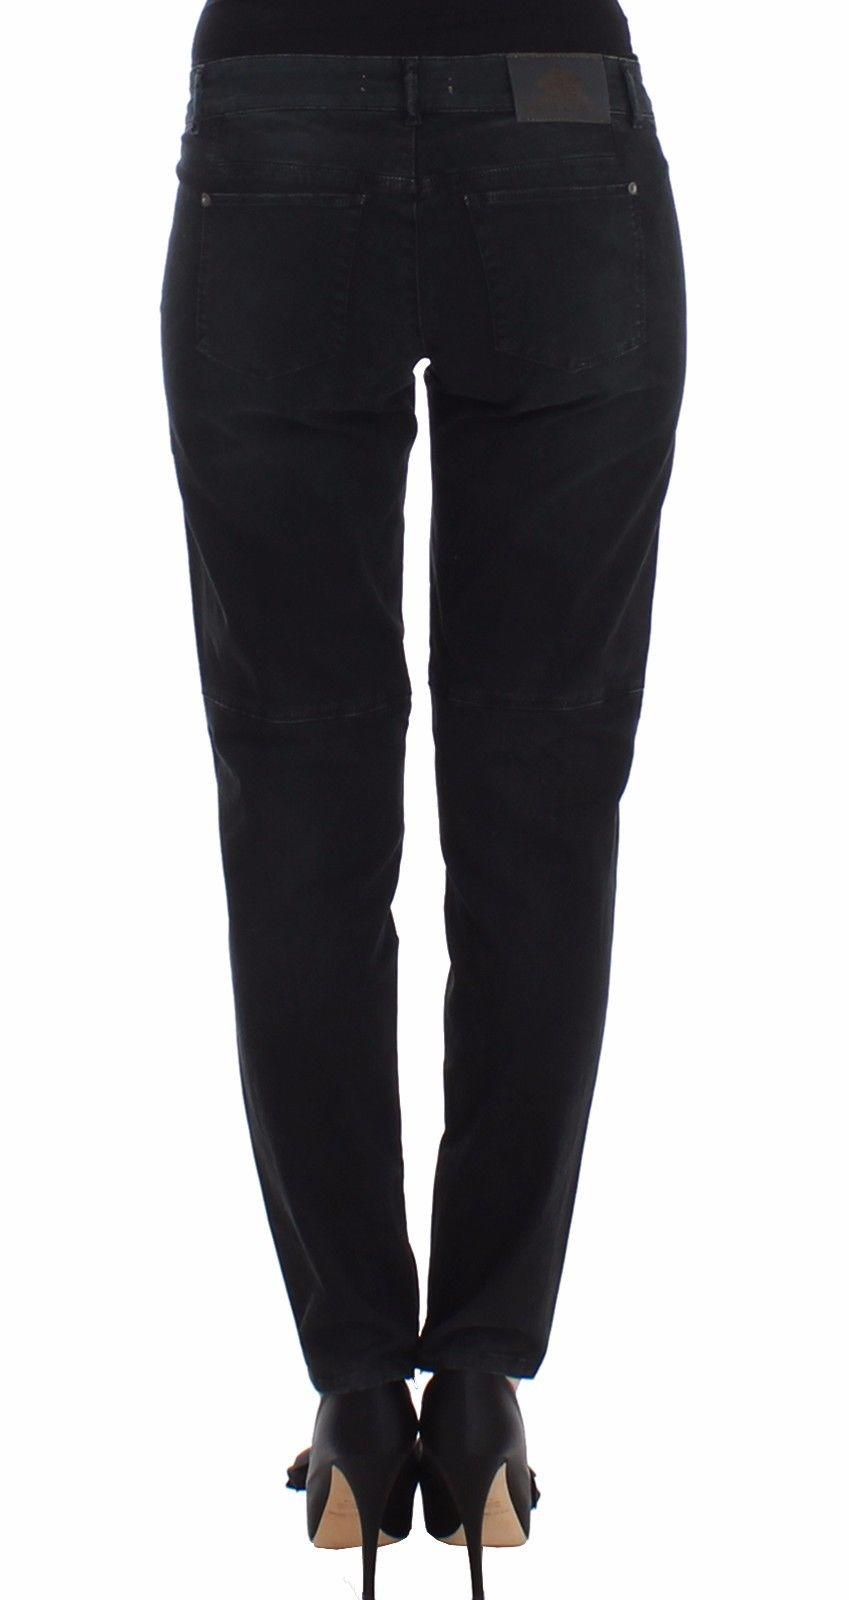 Blue Slim Jeans Denim Pants Skinny Leg Straight - Designed by Ermanno Scervino Available to Buy at a Discounted Price on Moon Behind The Hill Online Designer Discount Store